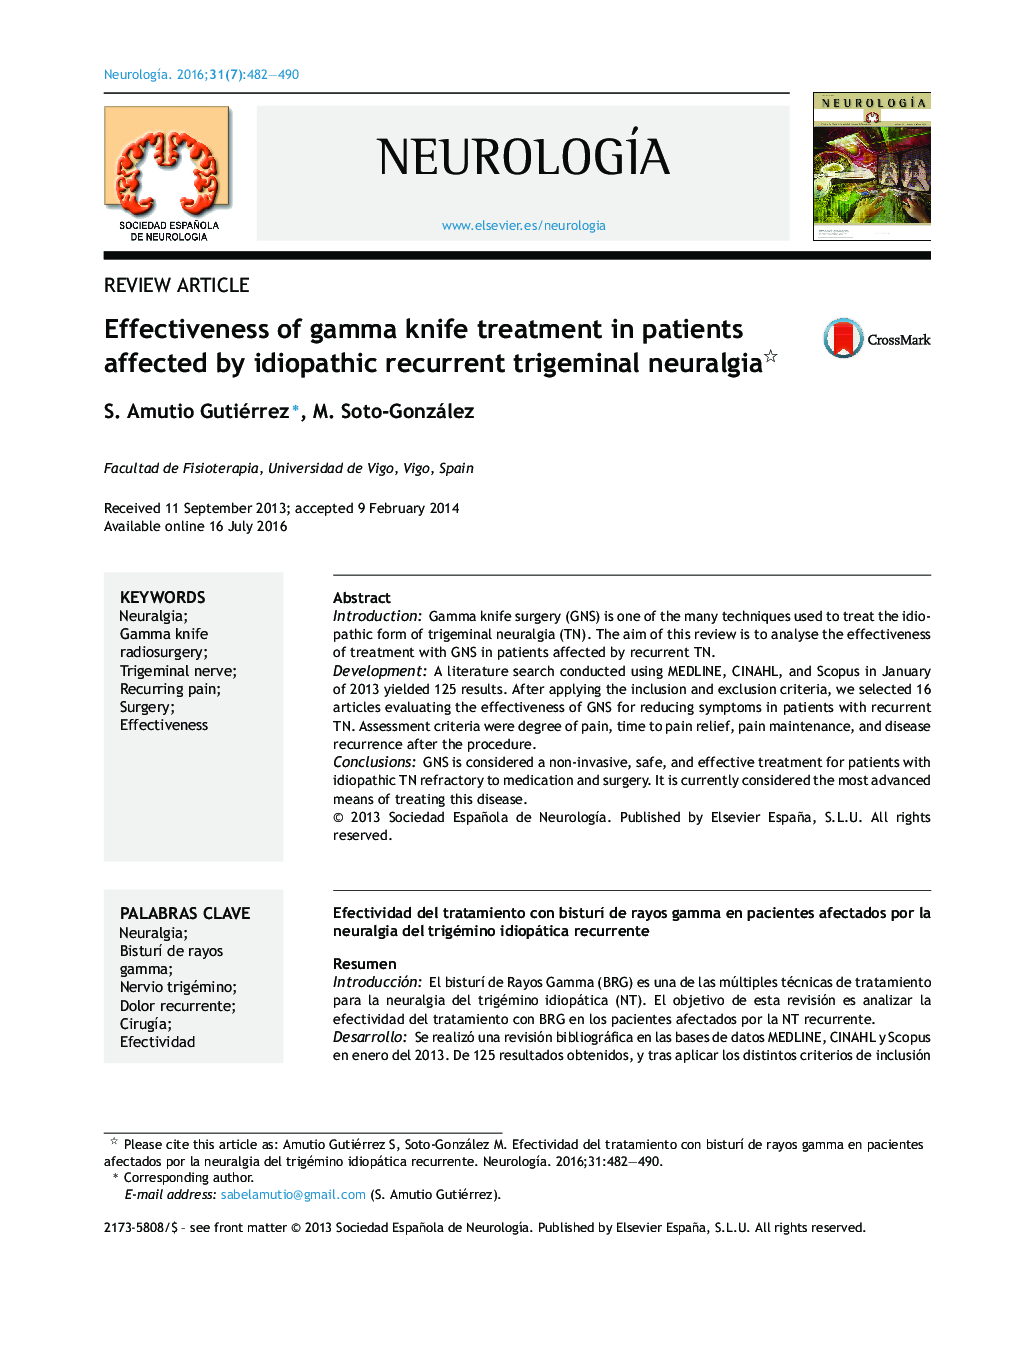 Effectiveness of gamma knife treatment in patients affected by idiopathic recurrent trigeminal neuralgia 